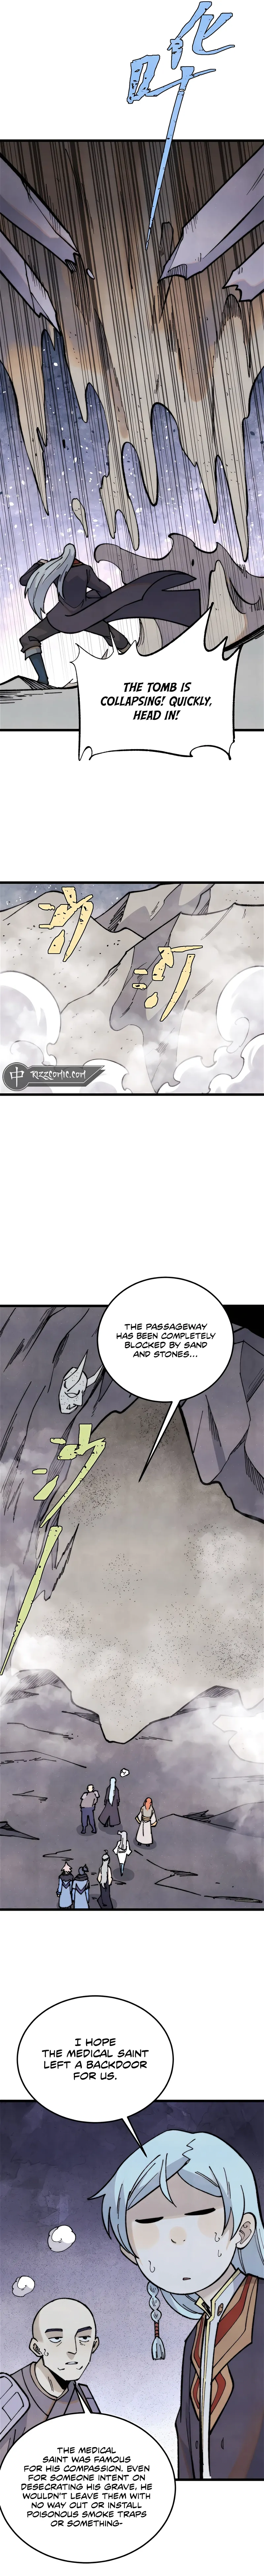 All Hail The Sect Leader Chapter 321 page 5